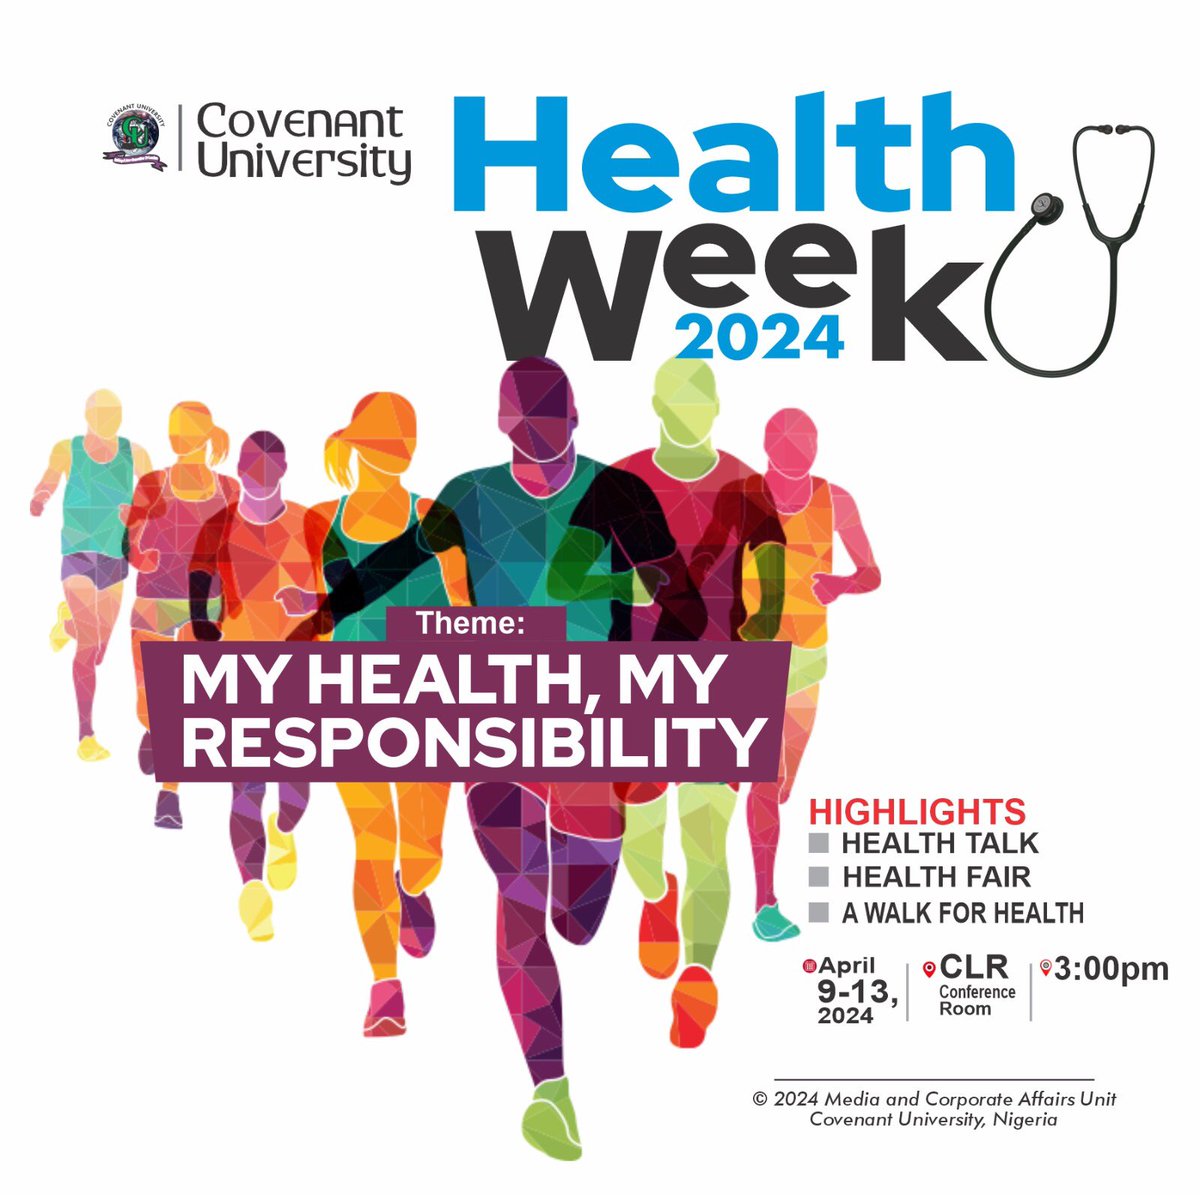 COVENANT UNIVERSITY HEALTH WEEK 2024, Begins today!🚀💃💃💃🔥🔥🔥‼️ ➢ THEME: My Health, My Responsibility DATE: April 9th – April 13th, 2024 TIME: 3:00pm VENUE: CLR Conference Room HIGHLIGHTS💥💥💥‼️ ➢ Health Talk ➢ Health Fair ➢ A Walk For Health #cuhebron #healthweek